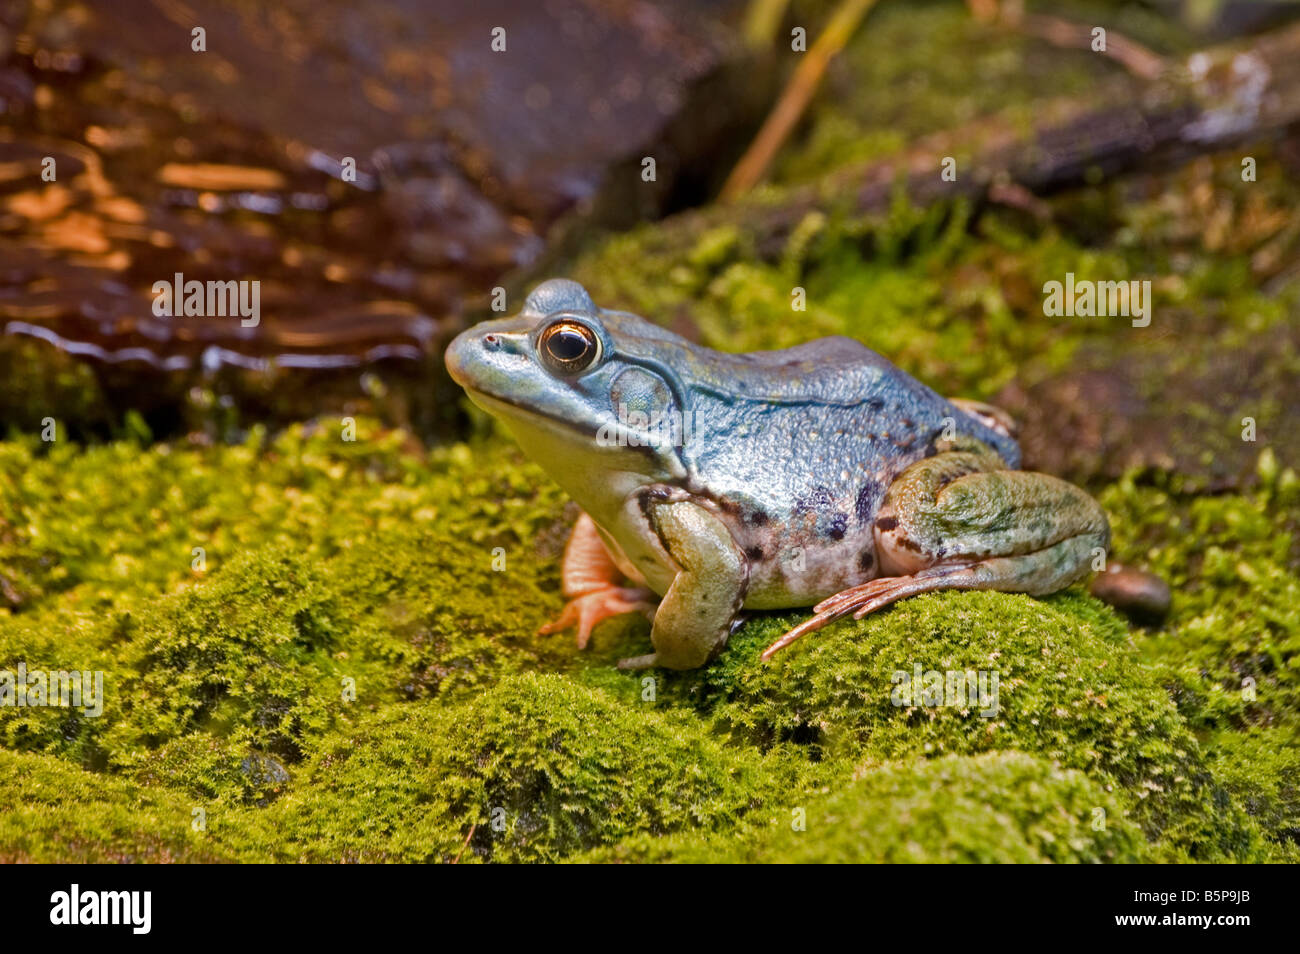 A view of a Green frog Stock Photo